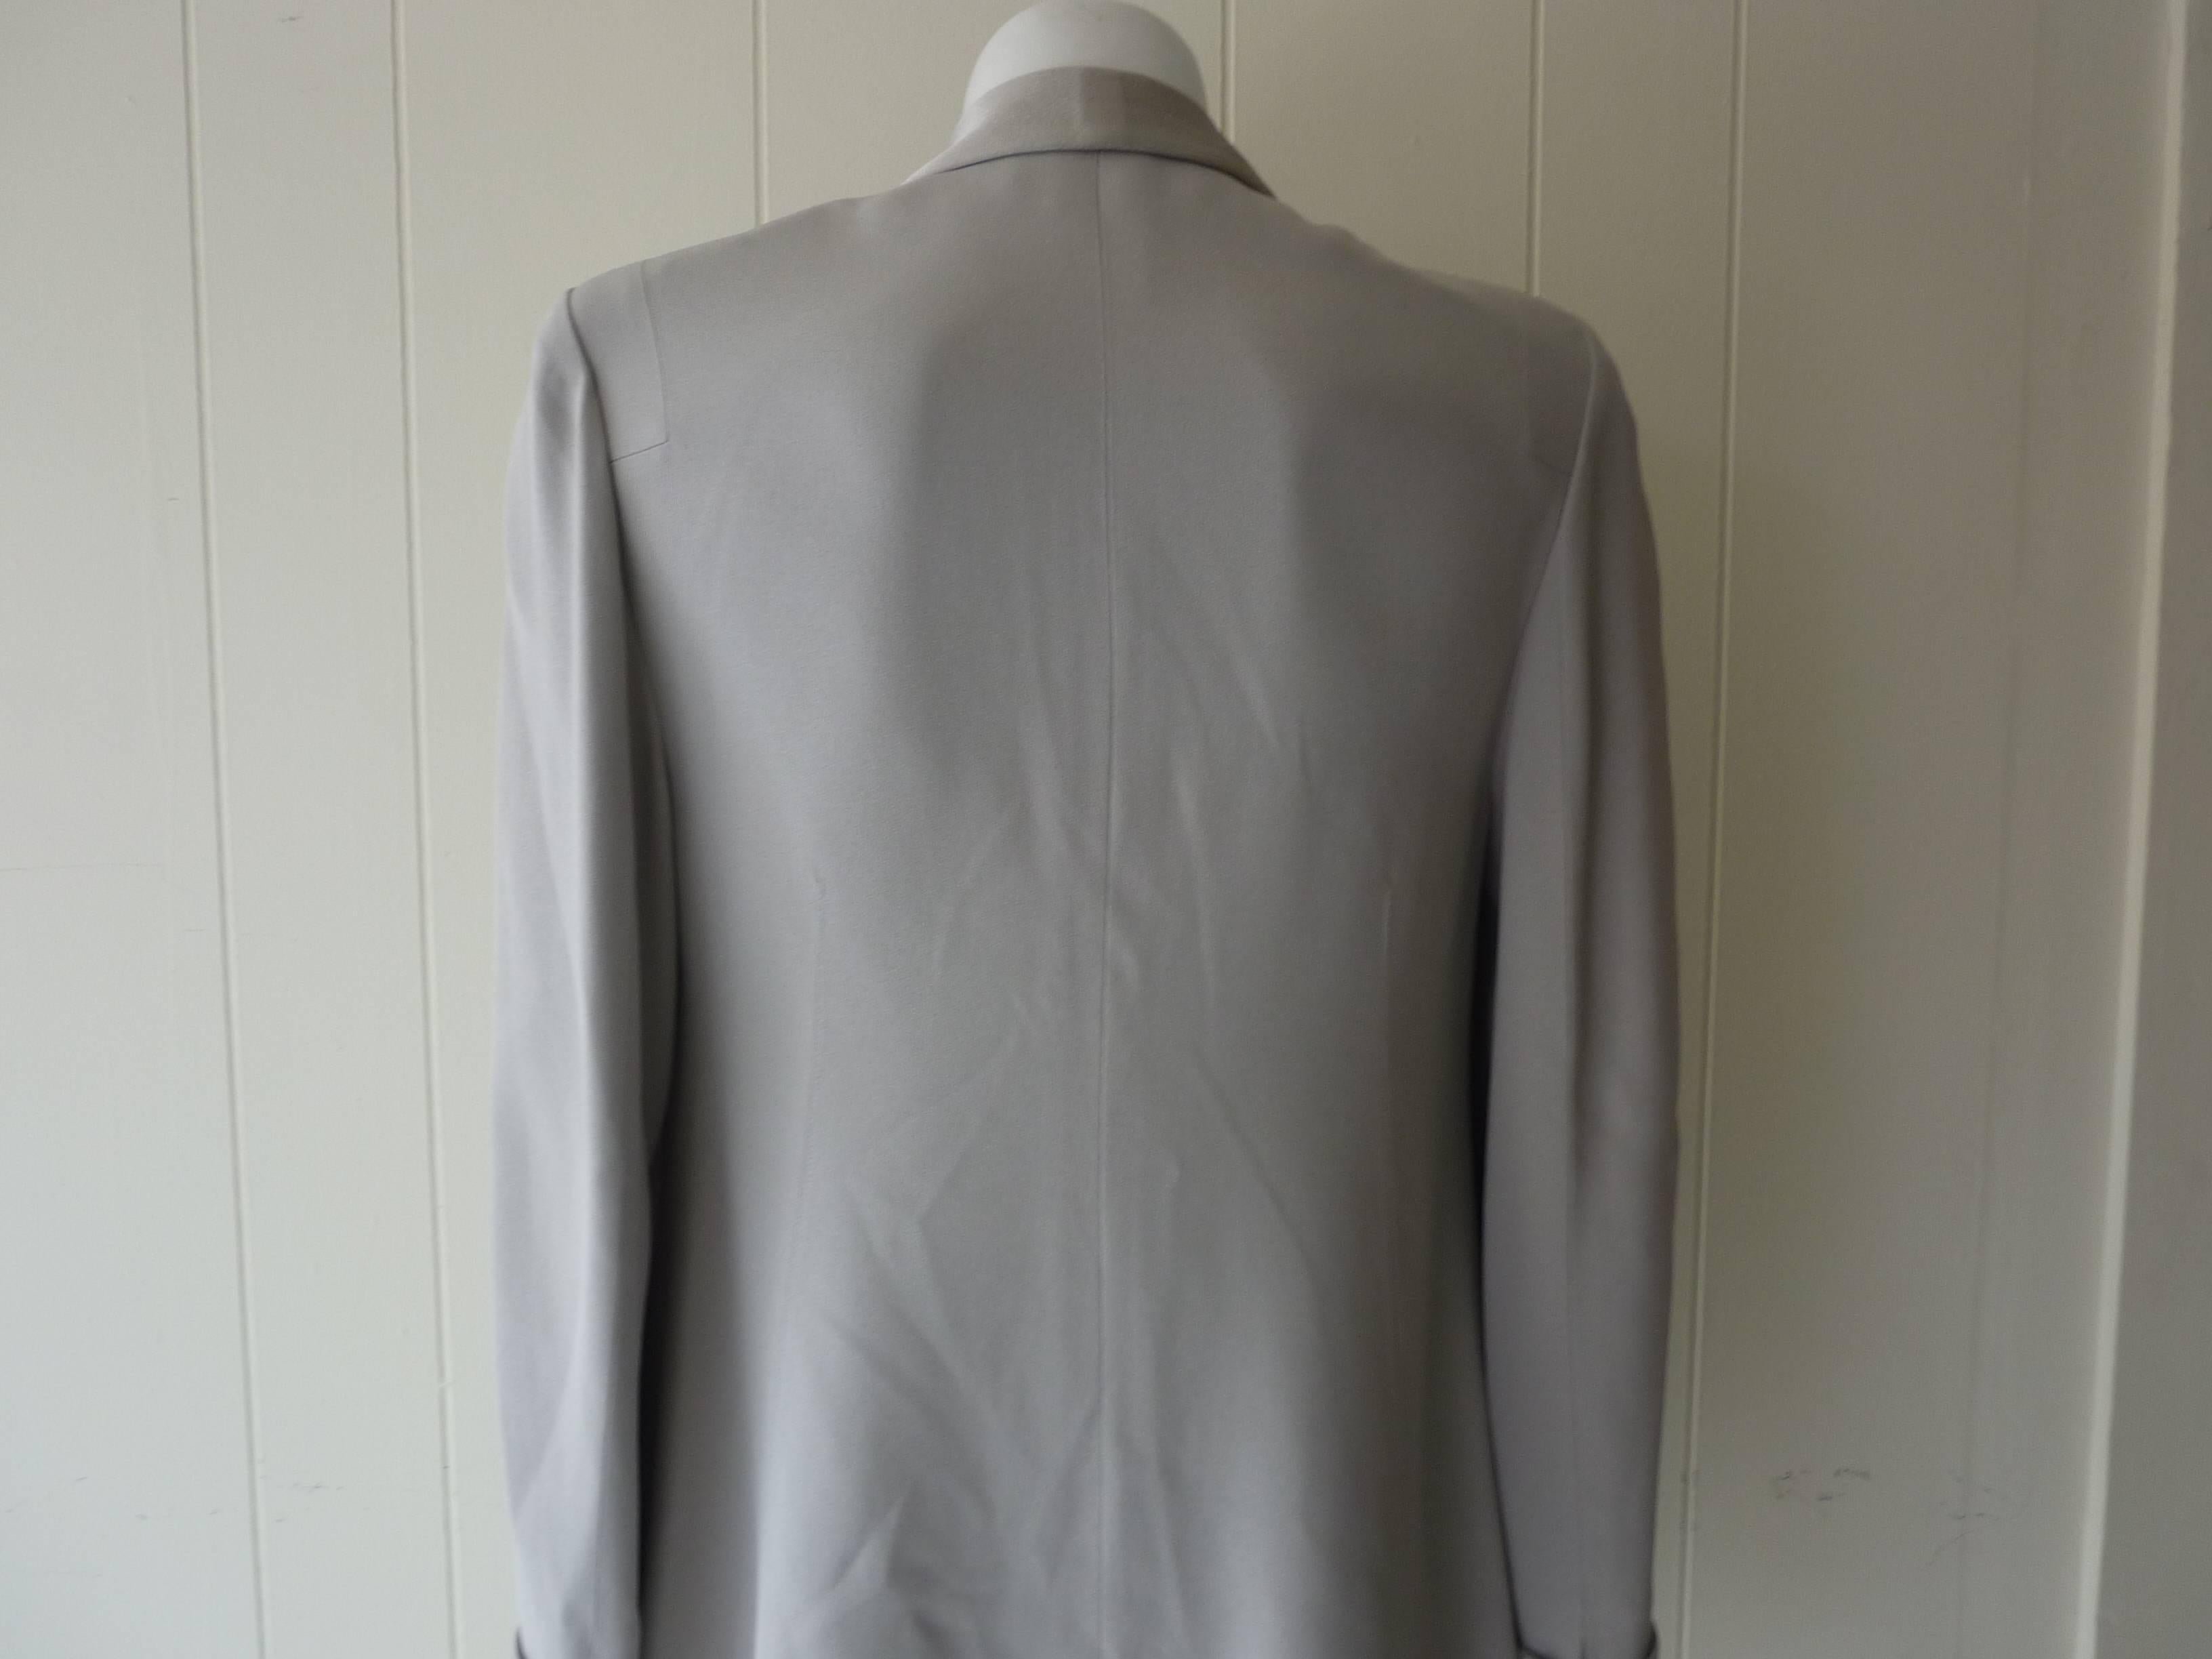 Wonderfully cut jacket in acetate (65%) and Viscose (35%). The soft pearl grey jacket has contrasting shiny lapels and turned cuffs (with slits); one covered button and two flap fake pockets.